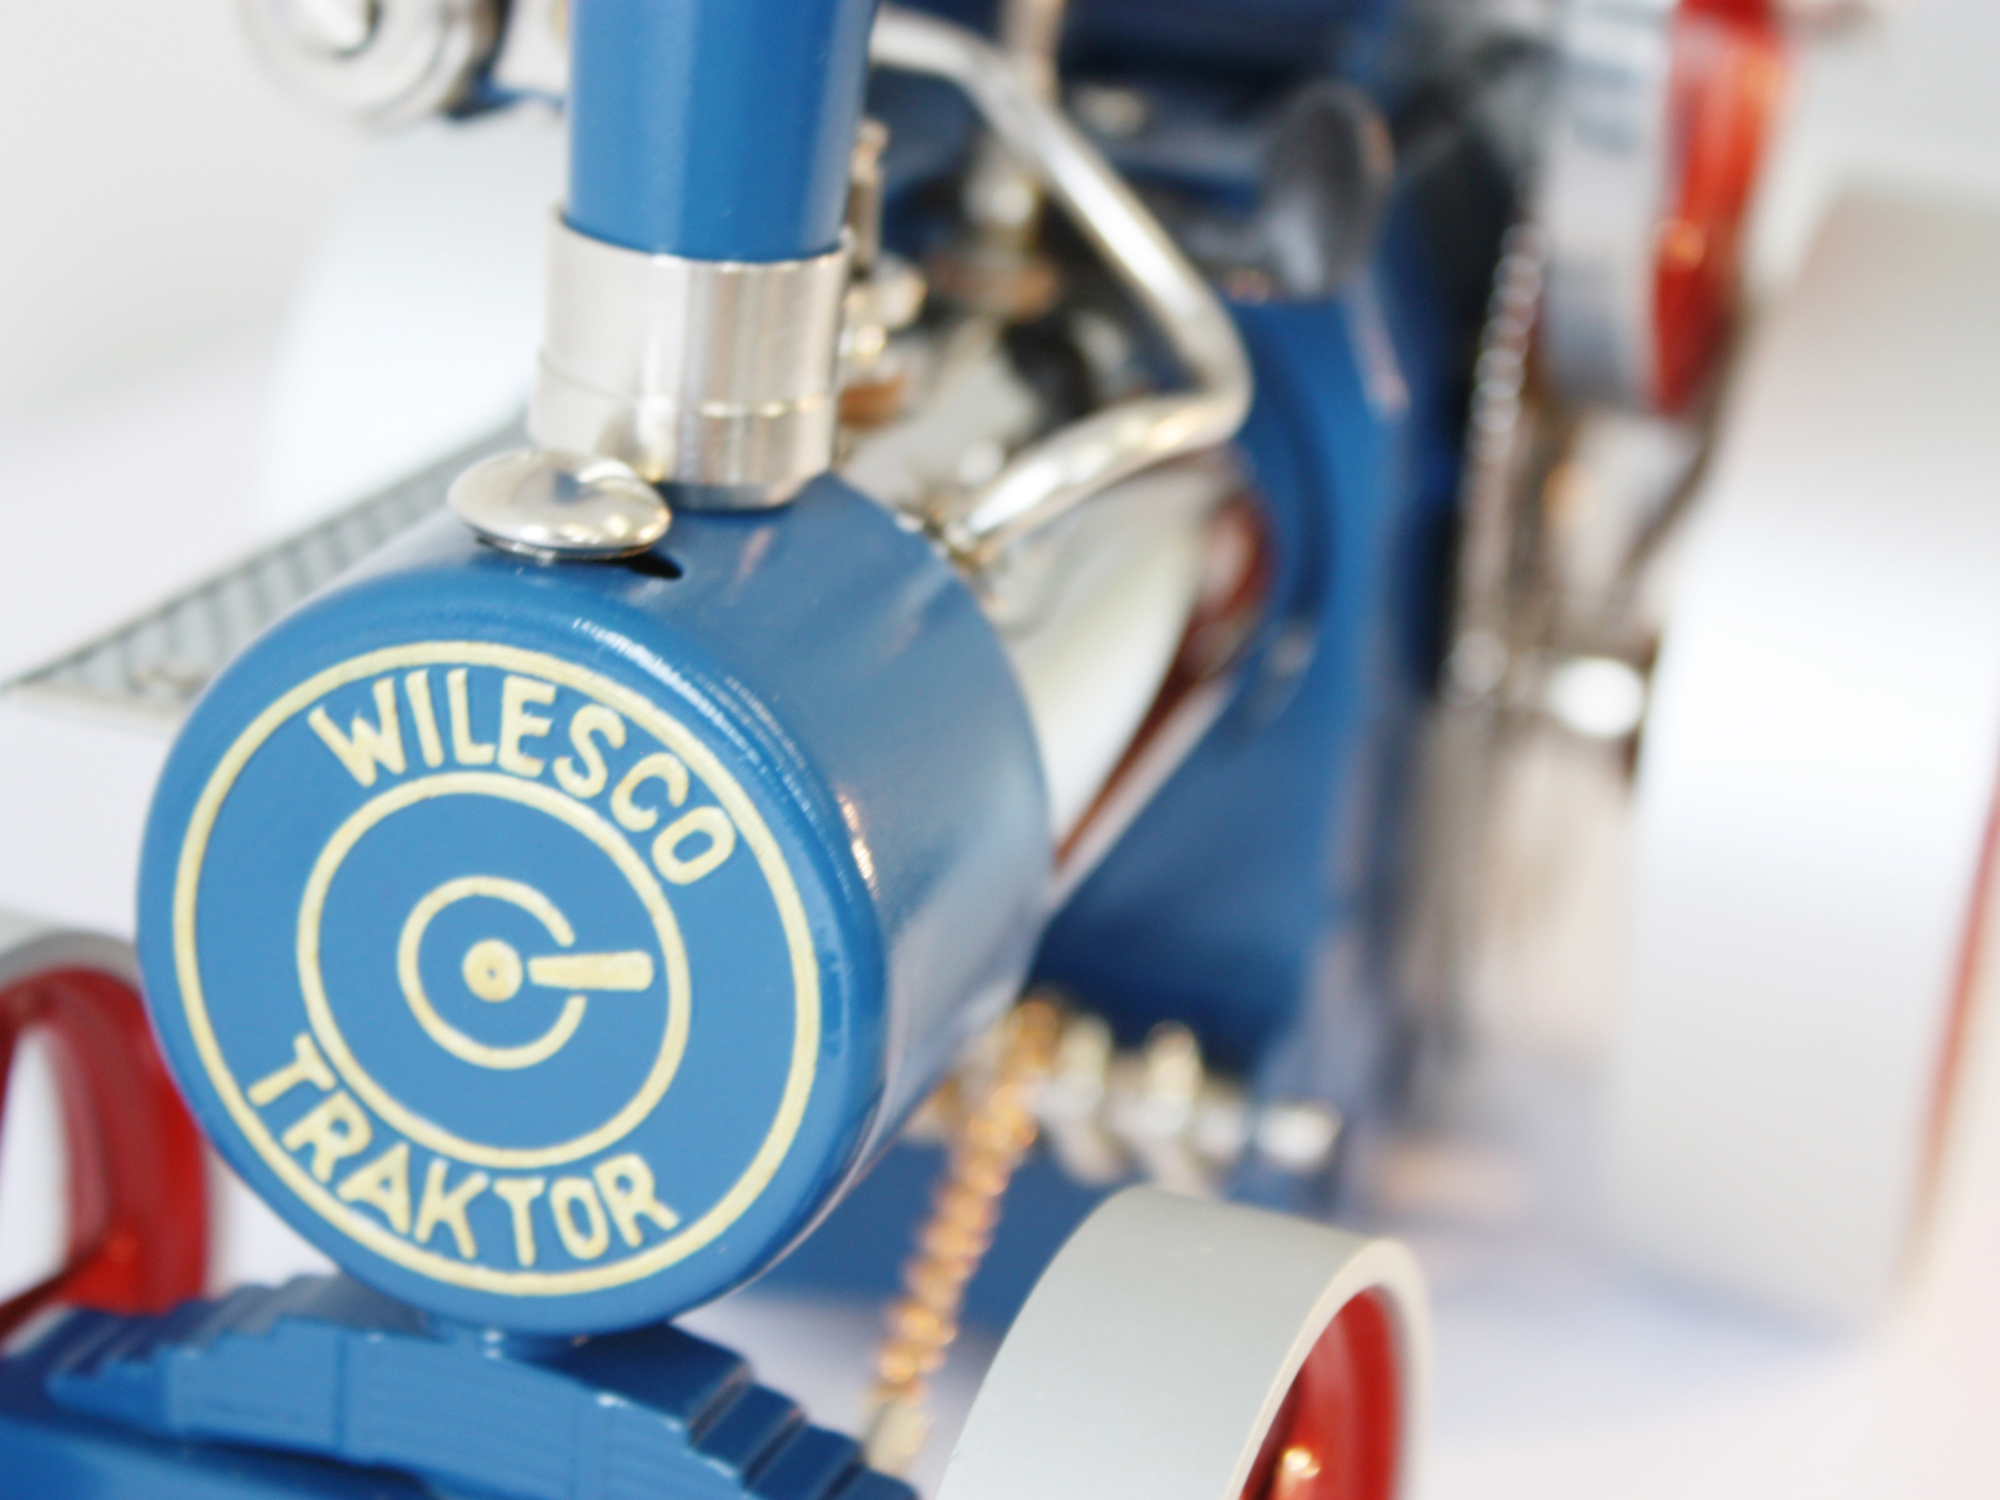 Wilesco Steam Tractor Kit D415 (blue/red)